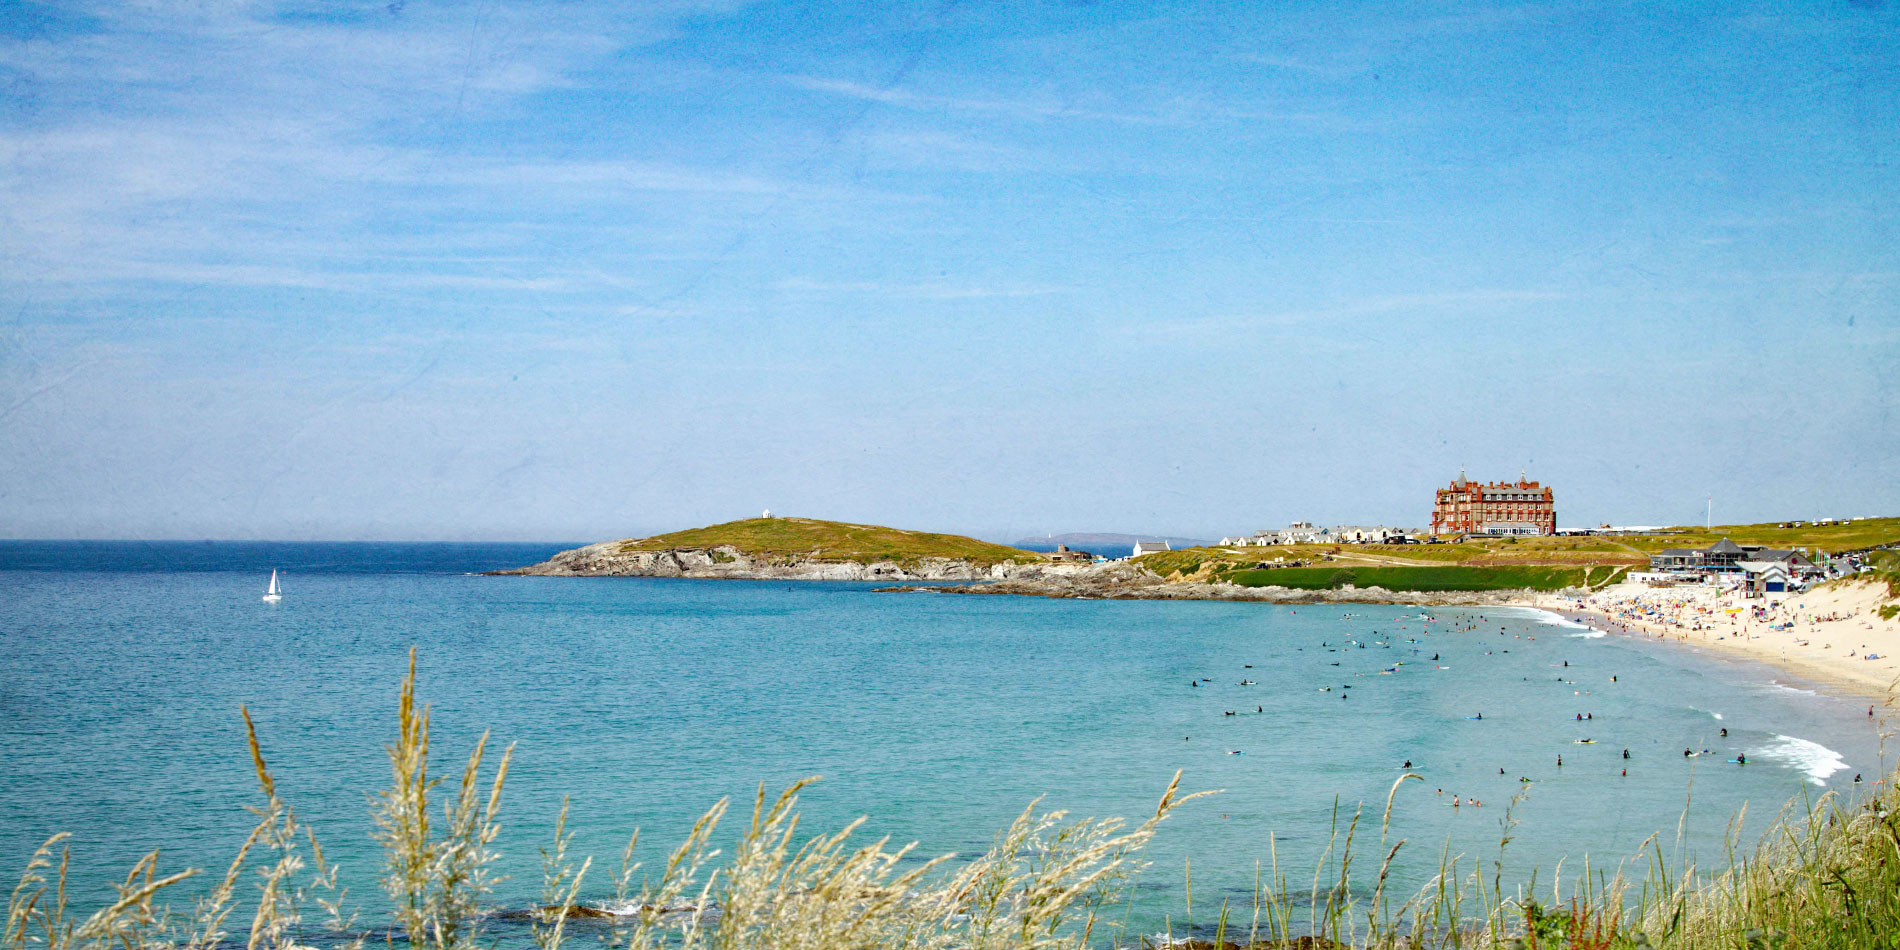 View of Fistral Beach with sea, beach and hotel in distance